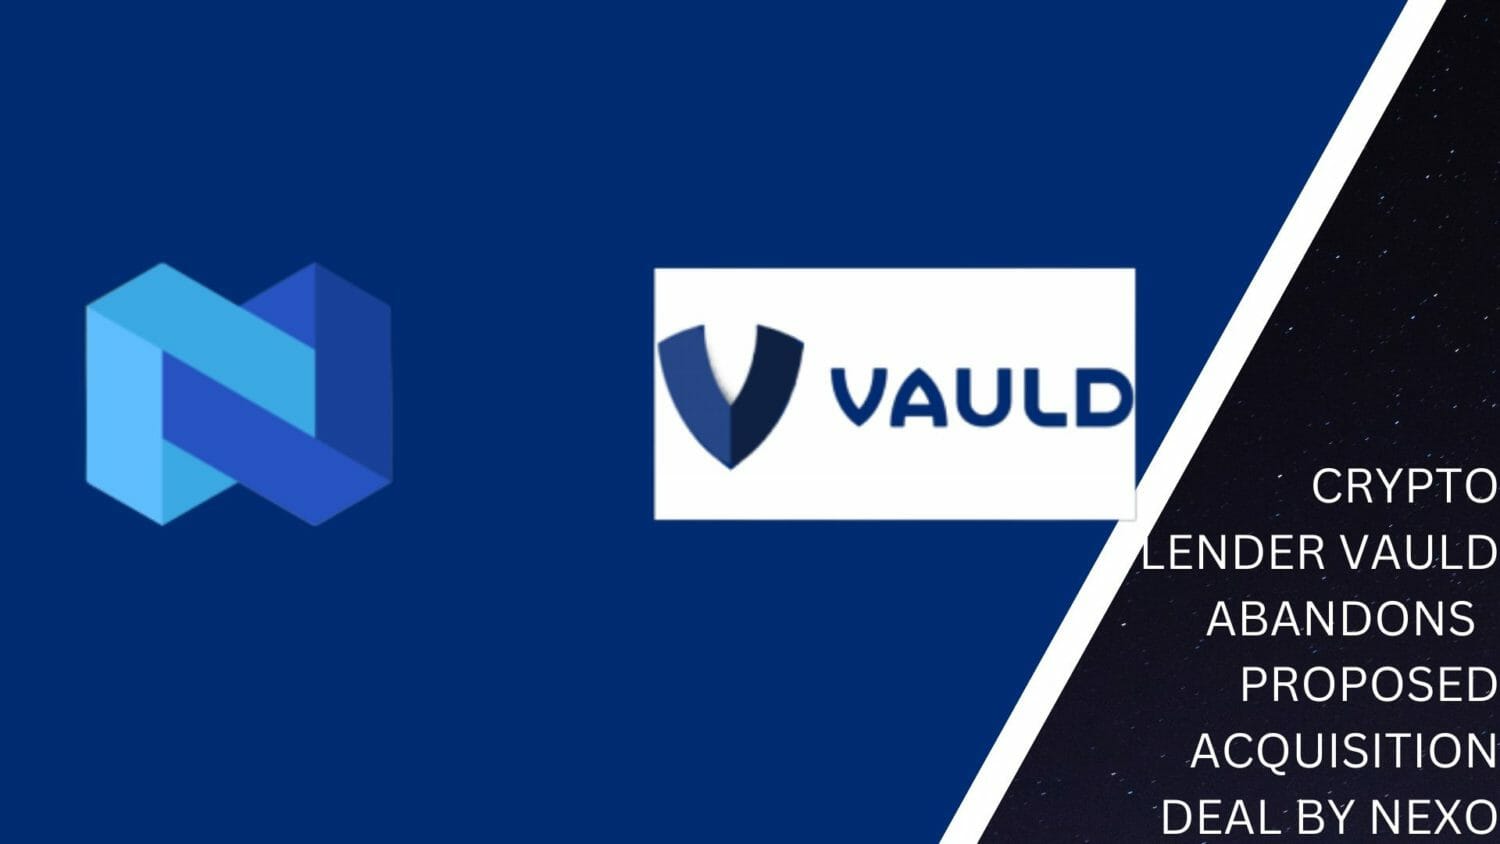 Crypto Lender Vauld Abandons Proposed Acquisition Deal By Nexo